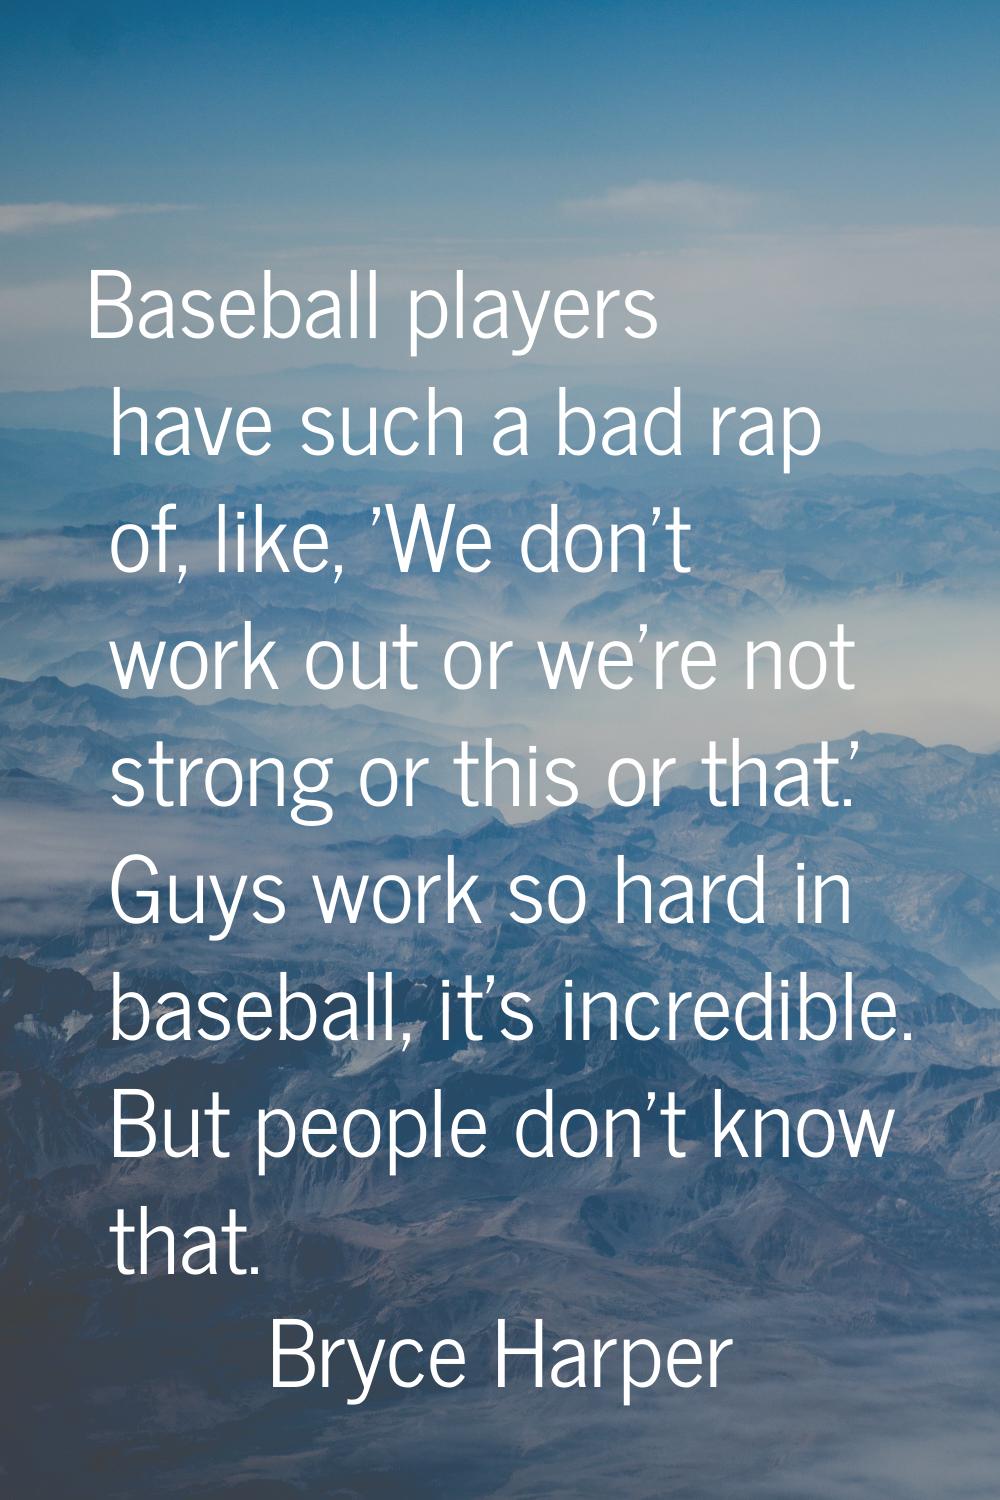 Baseball players have such a bad rap of, like, 'We don't work out or we're not strong or this or th